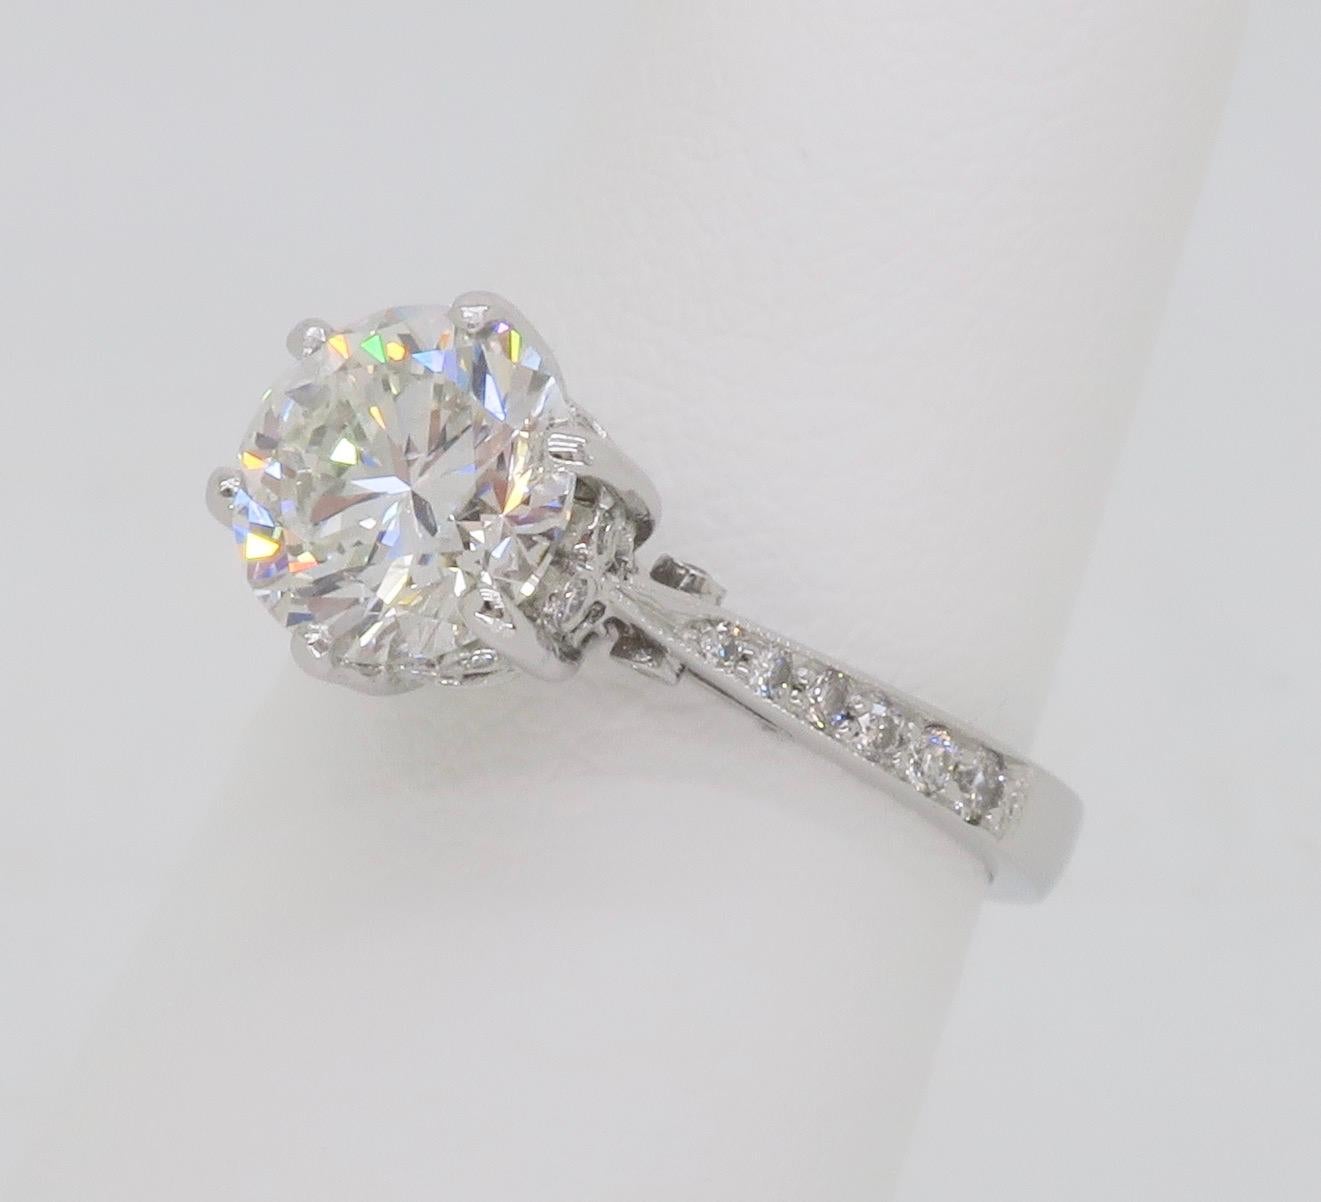 1.89ctw Diamond Engagement Ring in 18k White Gold  In Excellent Condition For Sale In Webster, NY